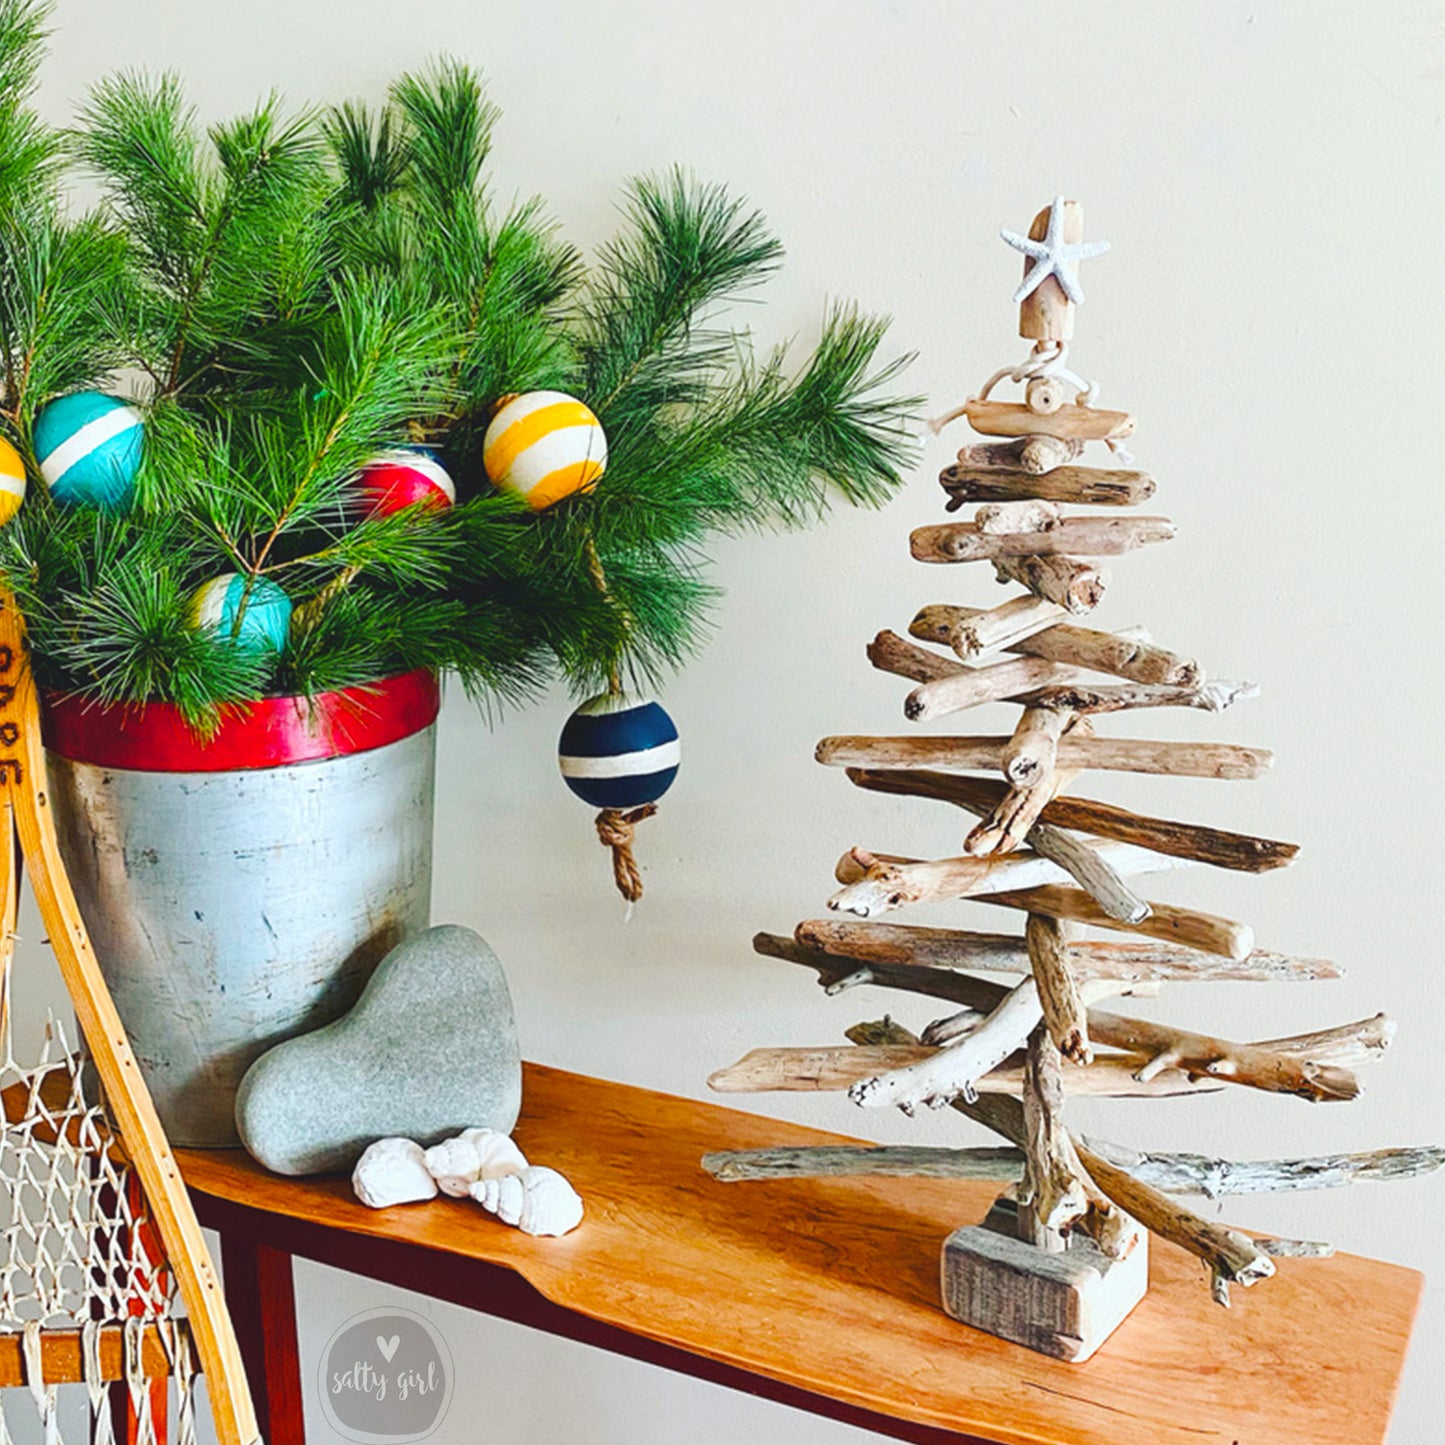 Driftwood Christmas Tree with Twinkle Lights 24" - Made in Maine